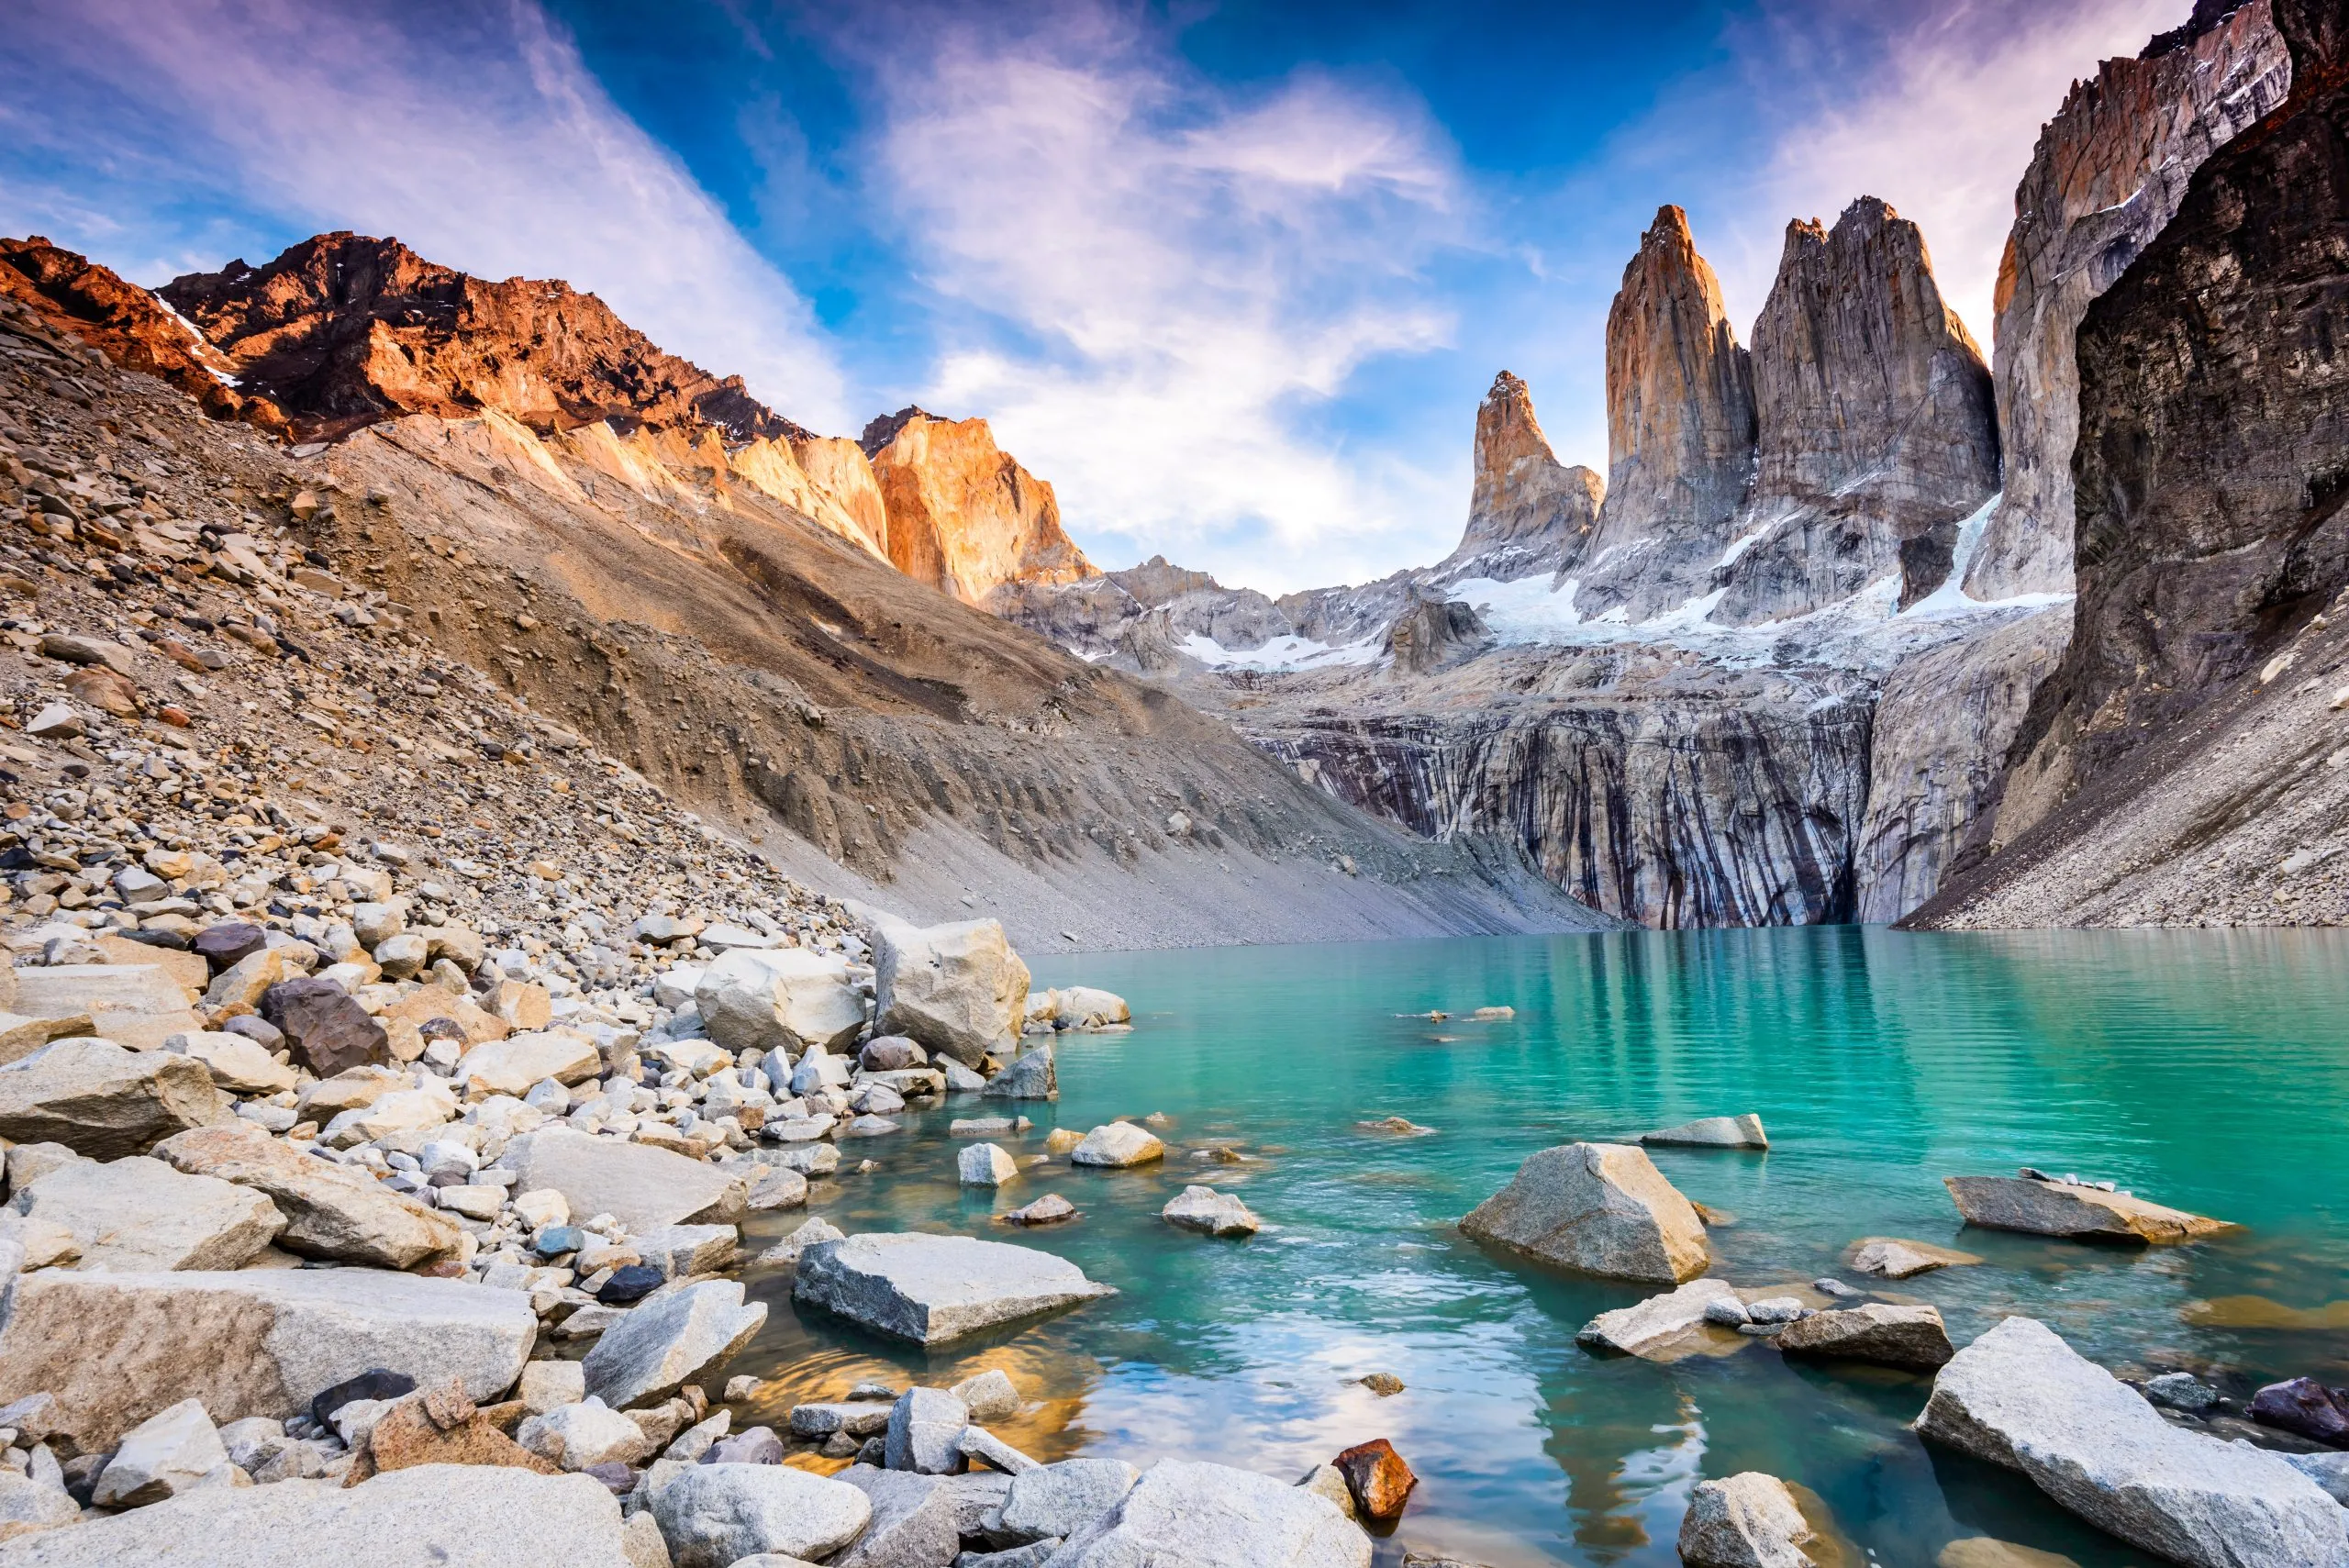 Meet the majestic Towers of Paine